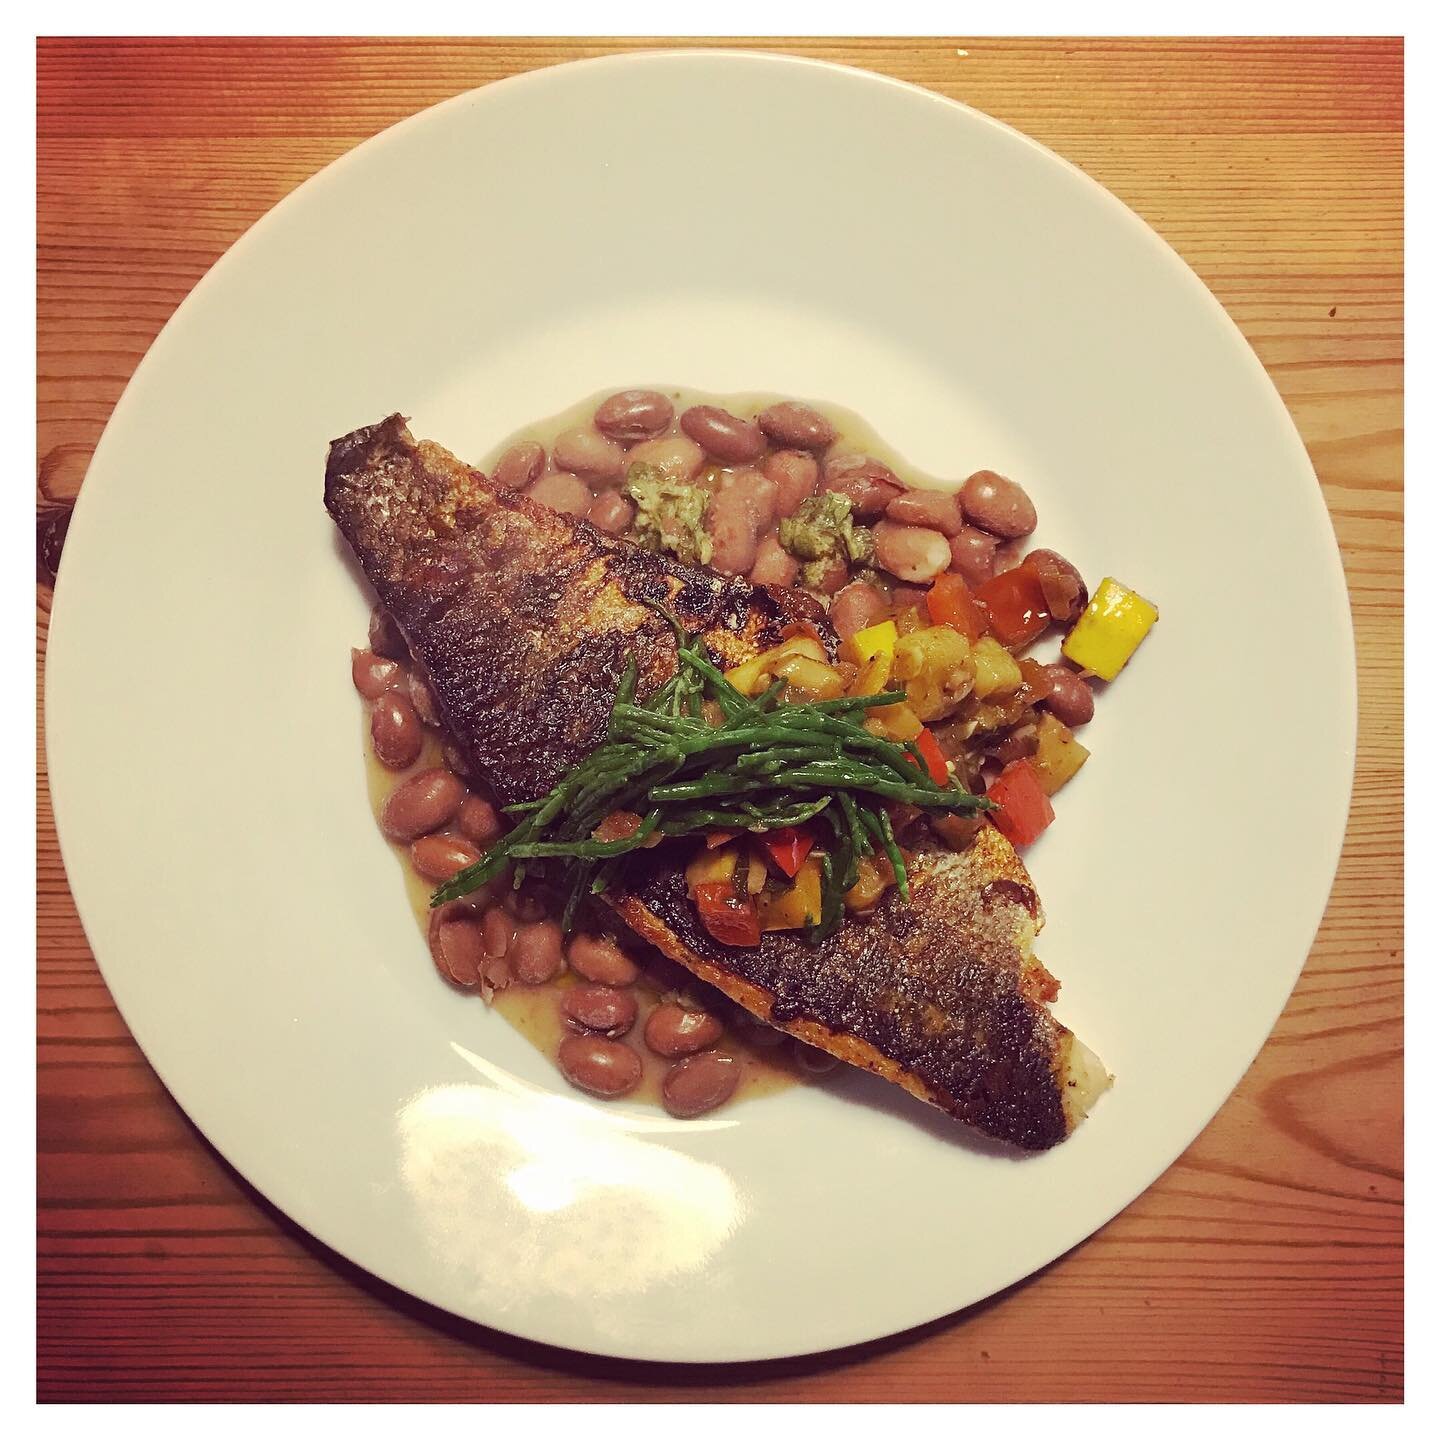 Coming soon to our three course delivery menu: seabass fillet served with braised borlotti beans, vegetable provencal, and an anchovy and herb sauce.